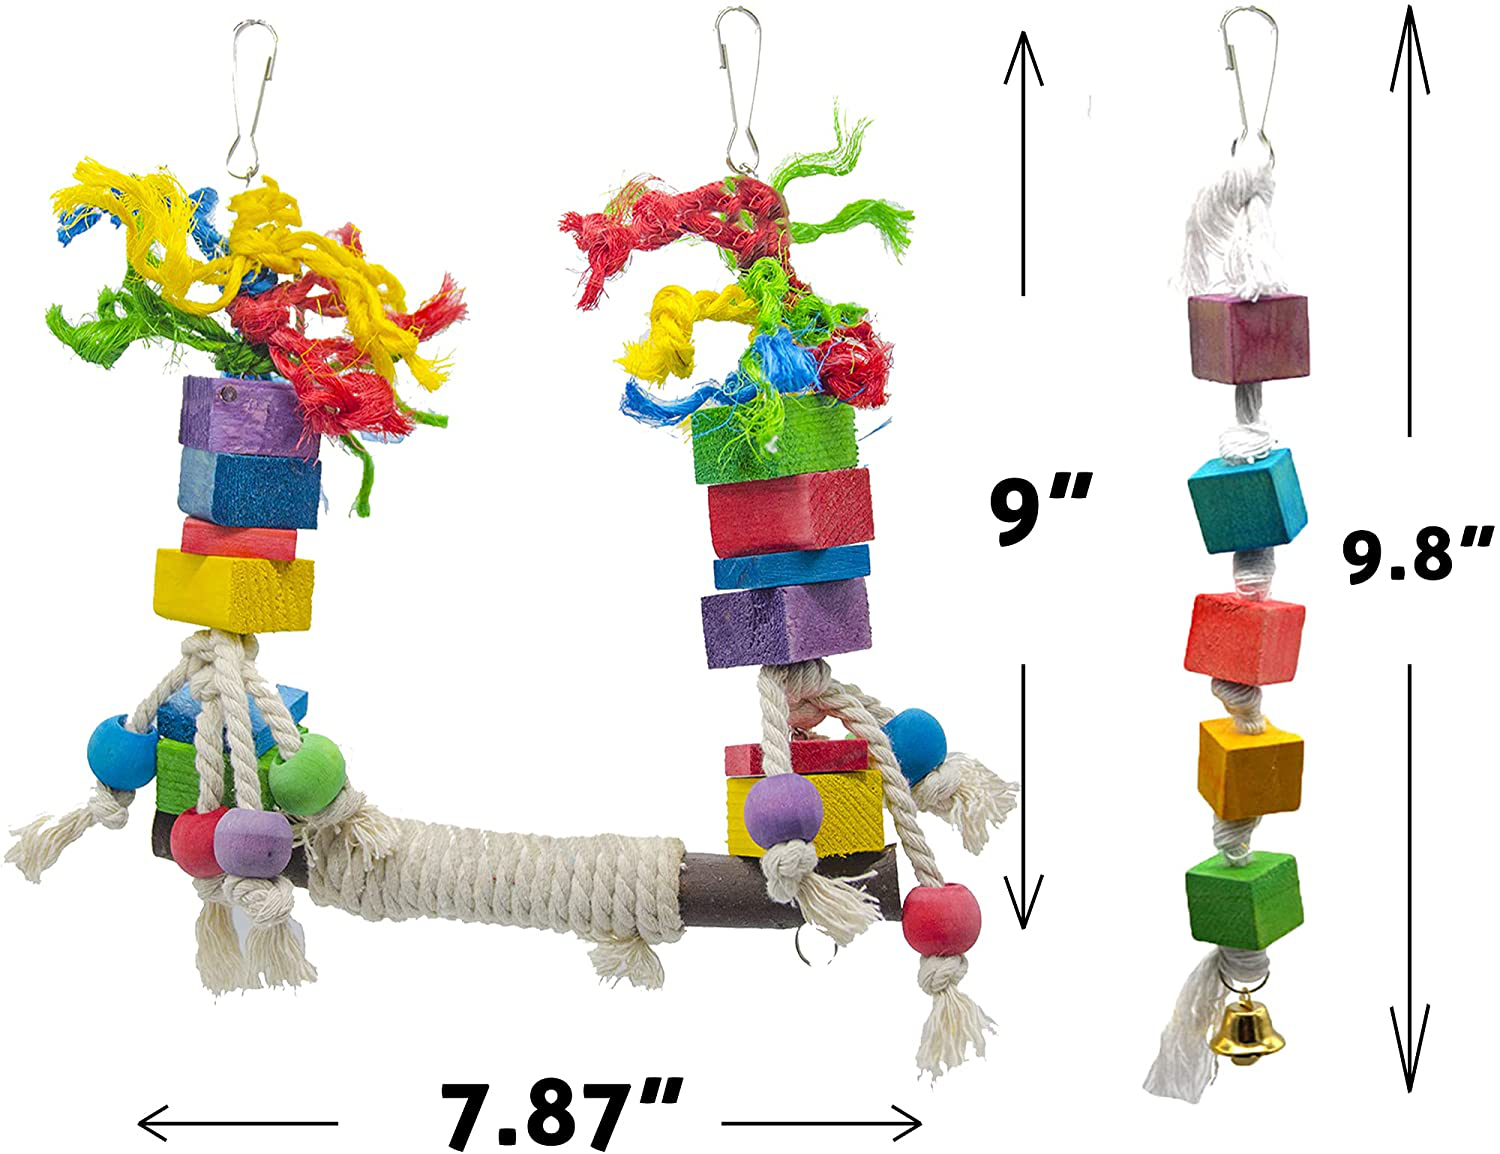 BIKOM 2PCS Bird Swing Toys Parrot Cage Bite Toys Wooden Block Bird Cage Hammock Swing Toy Hanging Toy for Parakeets Cockatiels or Medium Parrots and Birds like Amazon,African Grey and Cockatoos.